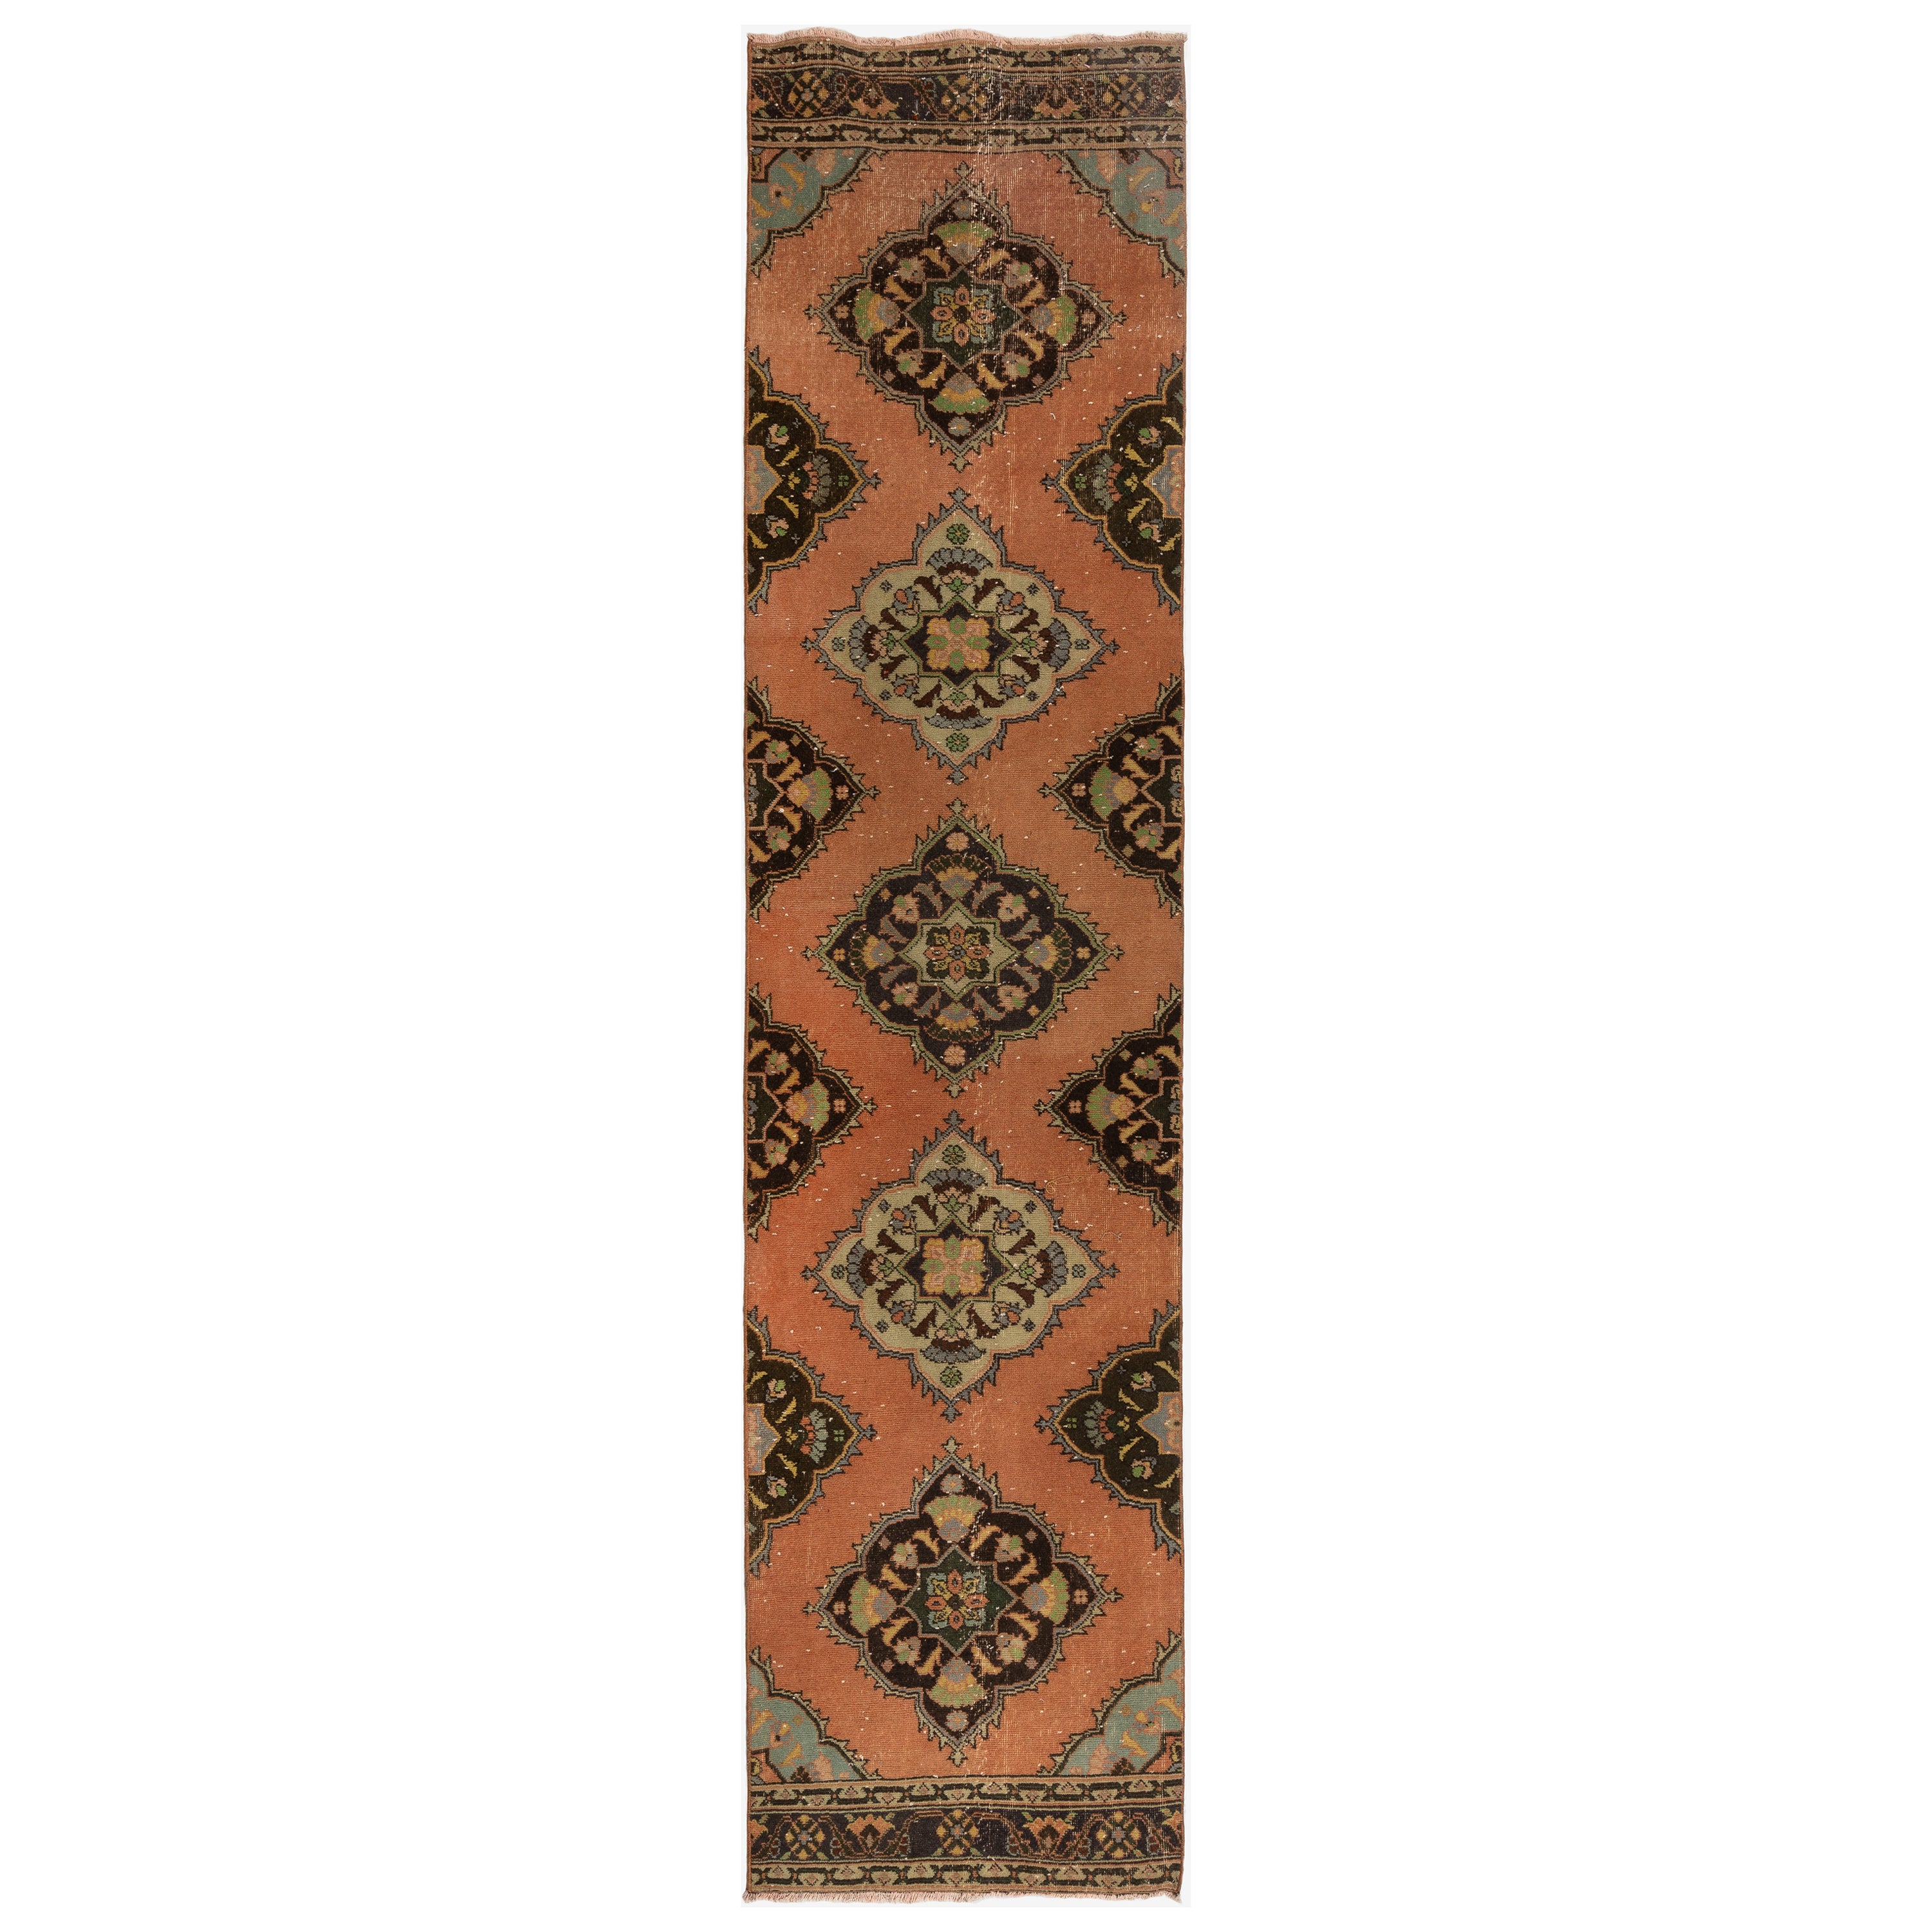 3x12.7 Ft Vintage Anatolian Runner Rug, 100% Wool, Hand-Knotted Corridor Carpet For Sale